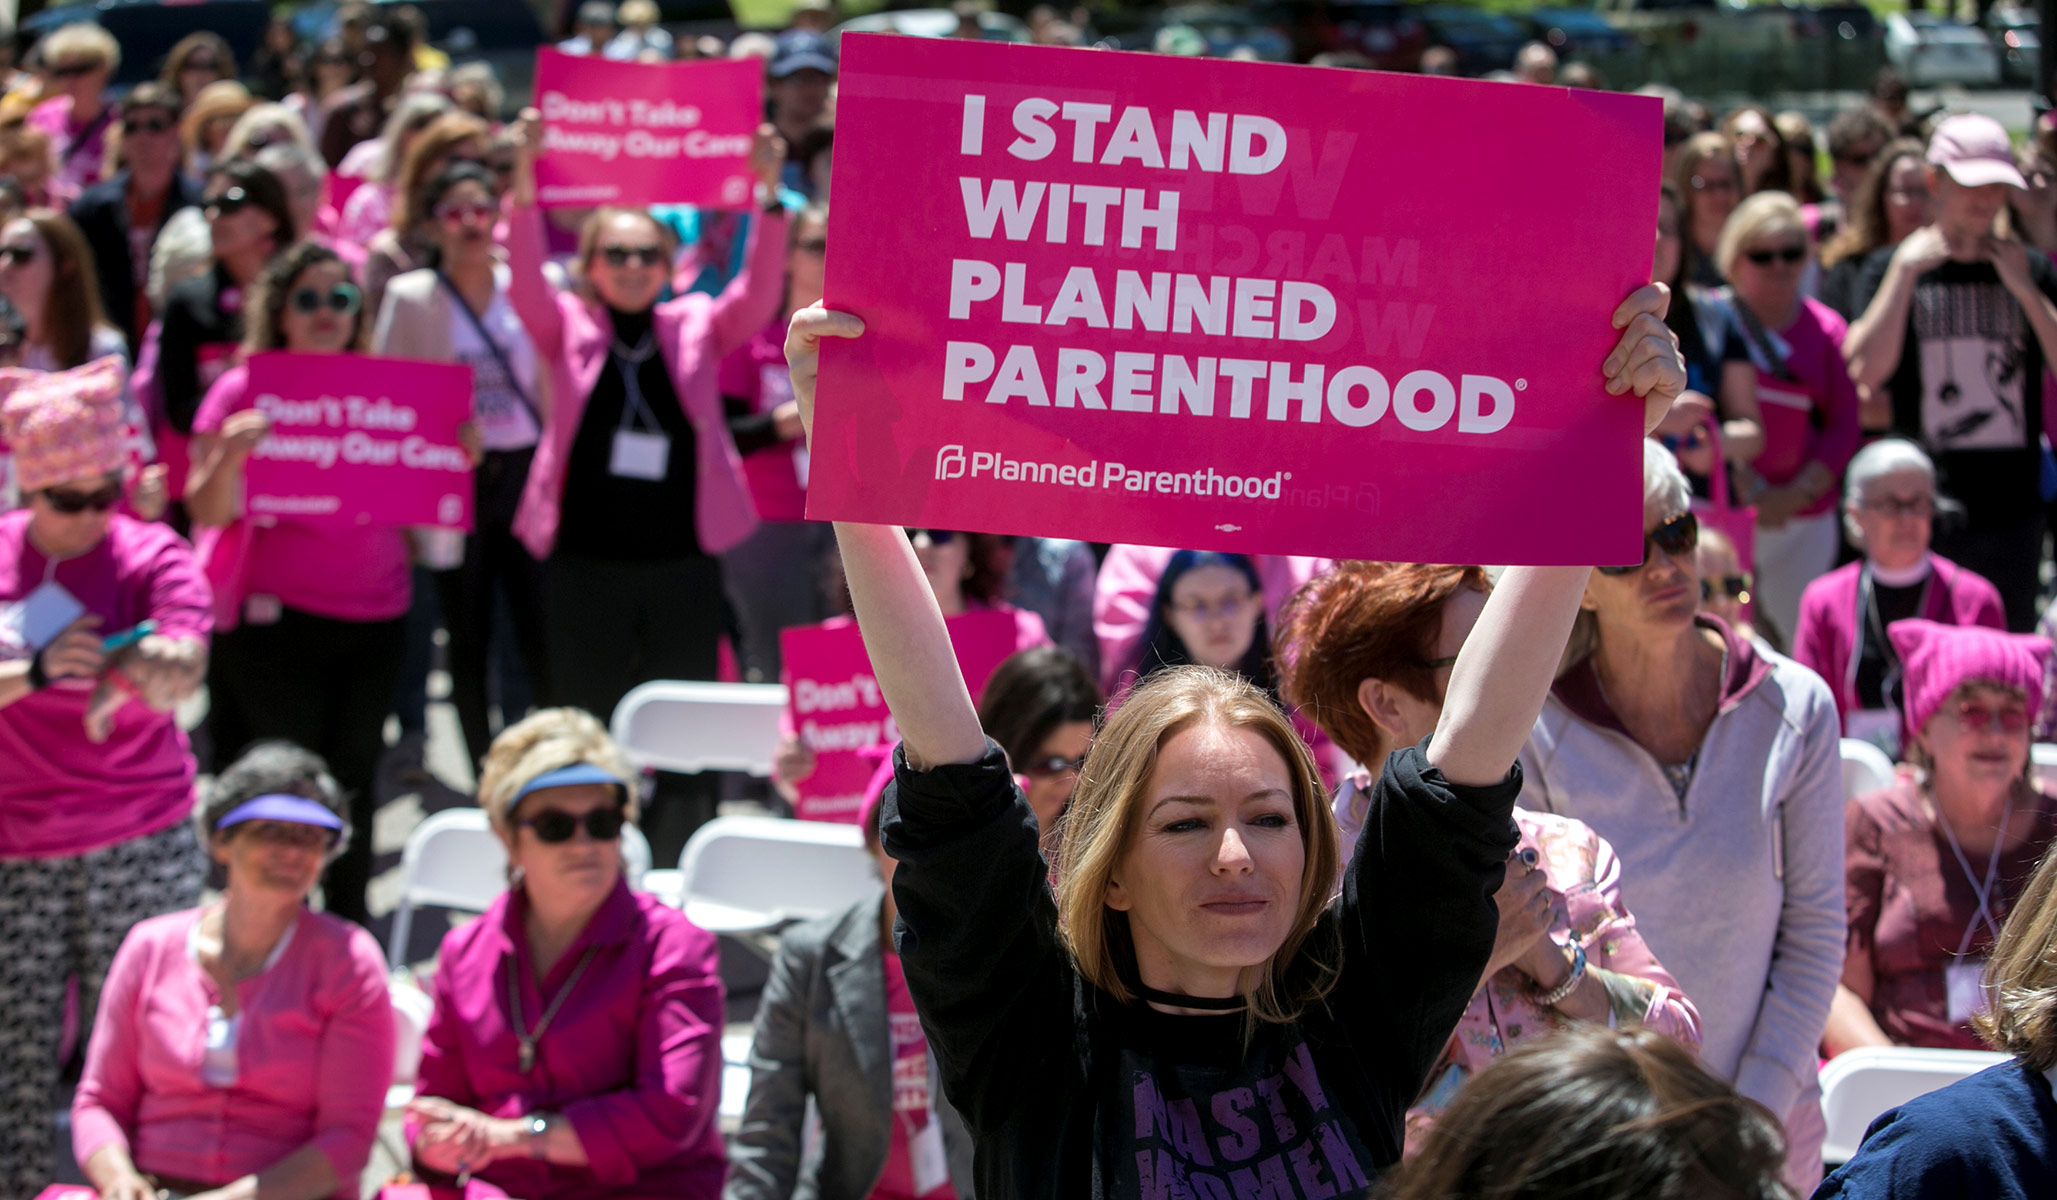 Demonstrators at a Planned Parenthood rally at the State Capitol in Austin, Texas, April 5, 2017. (Ilana Panich-Linsman/Reuters)